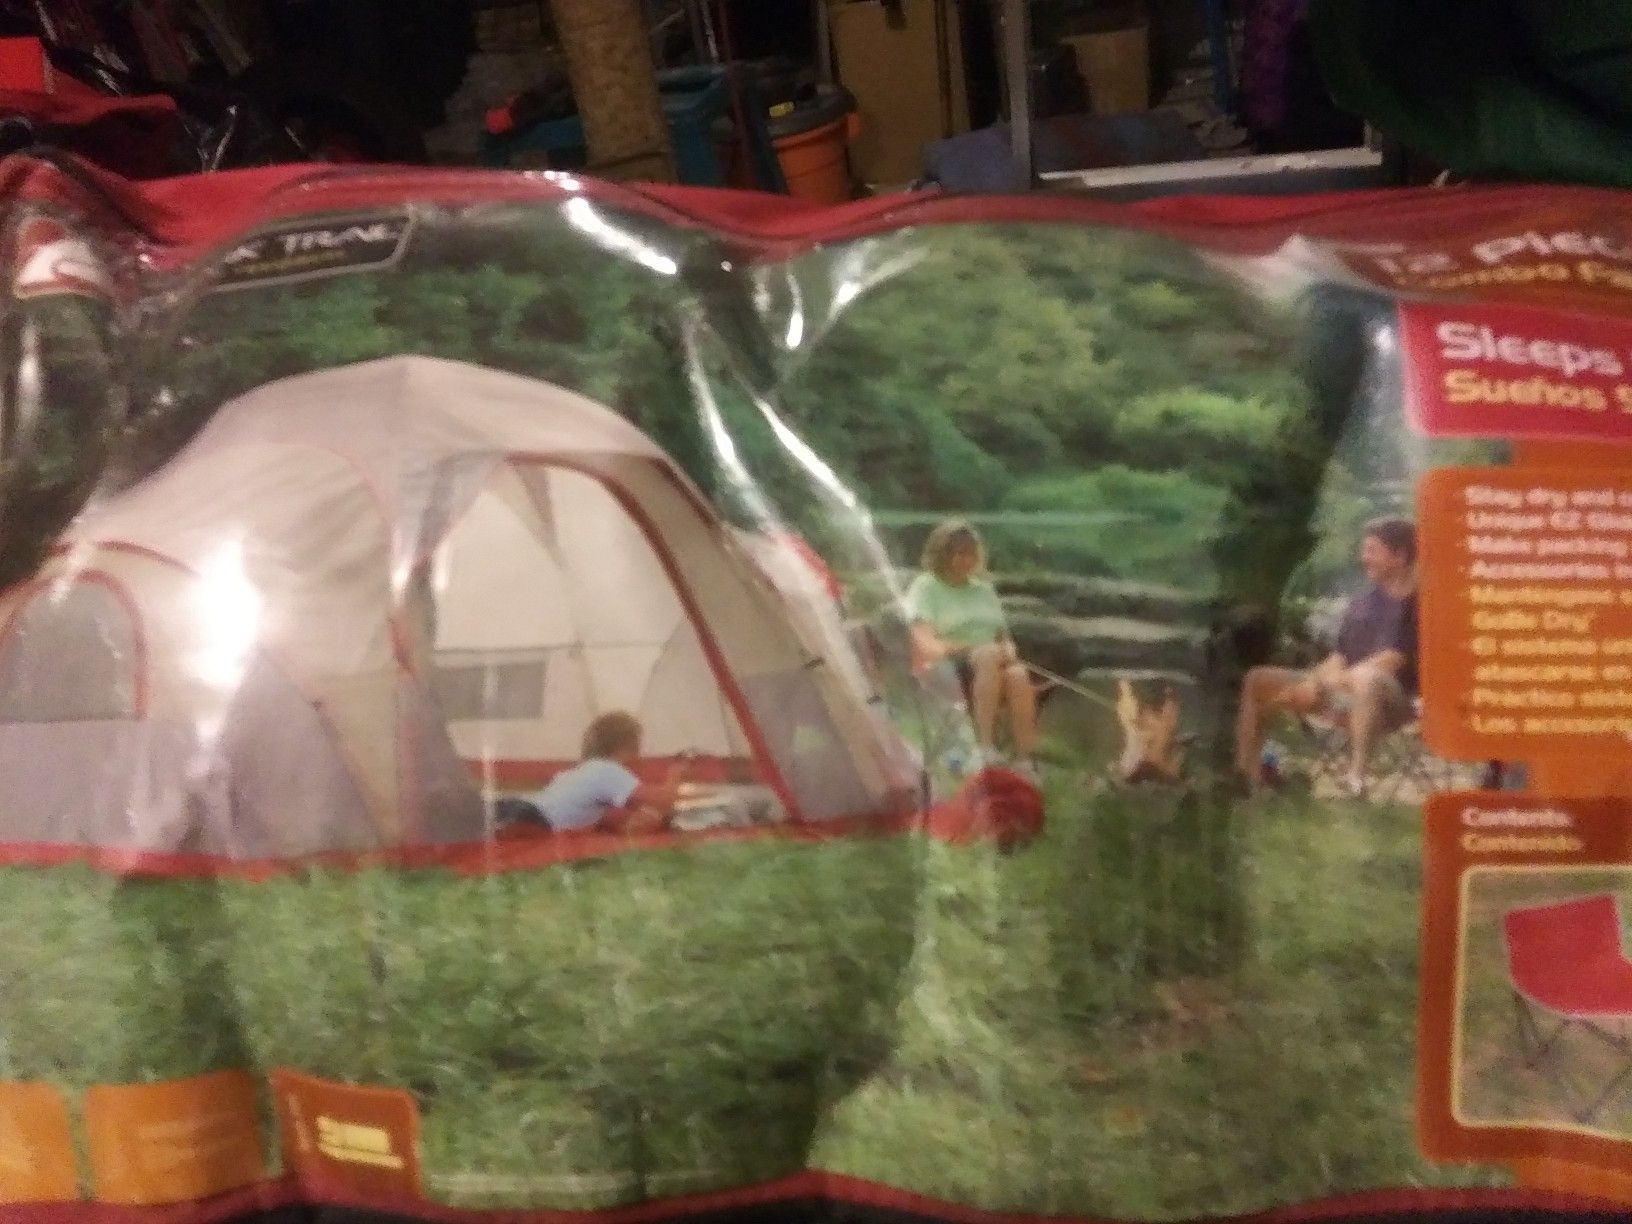 This is a camping set for 5 people